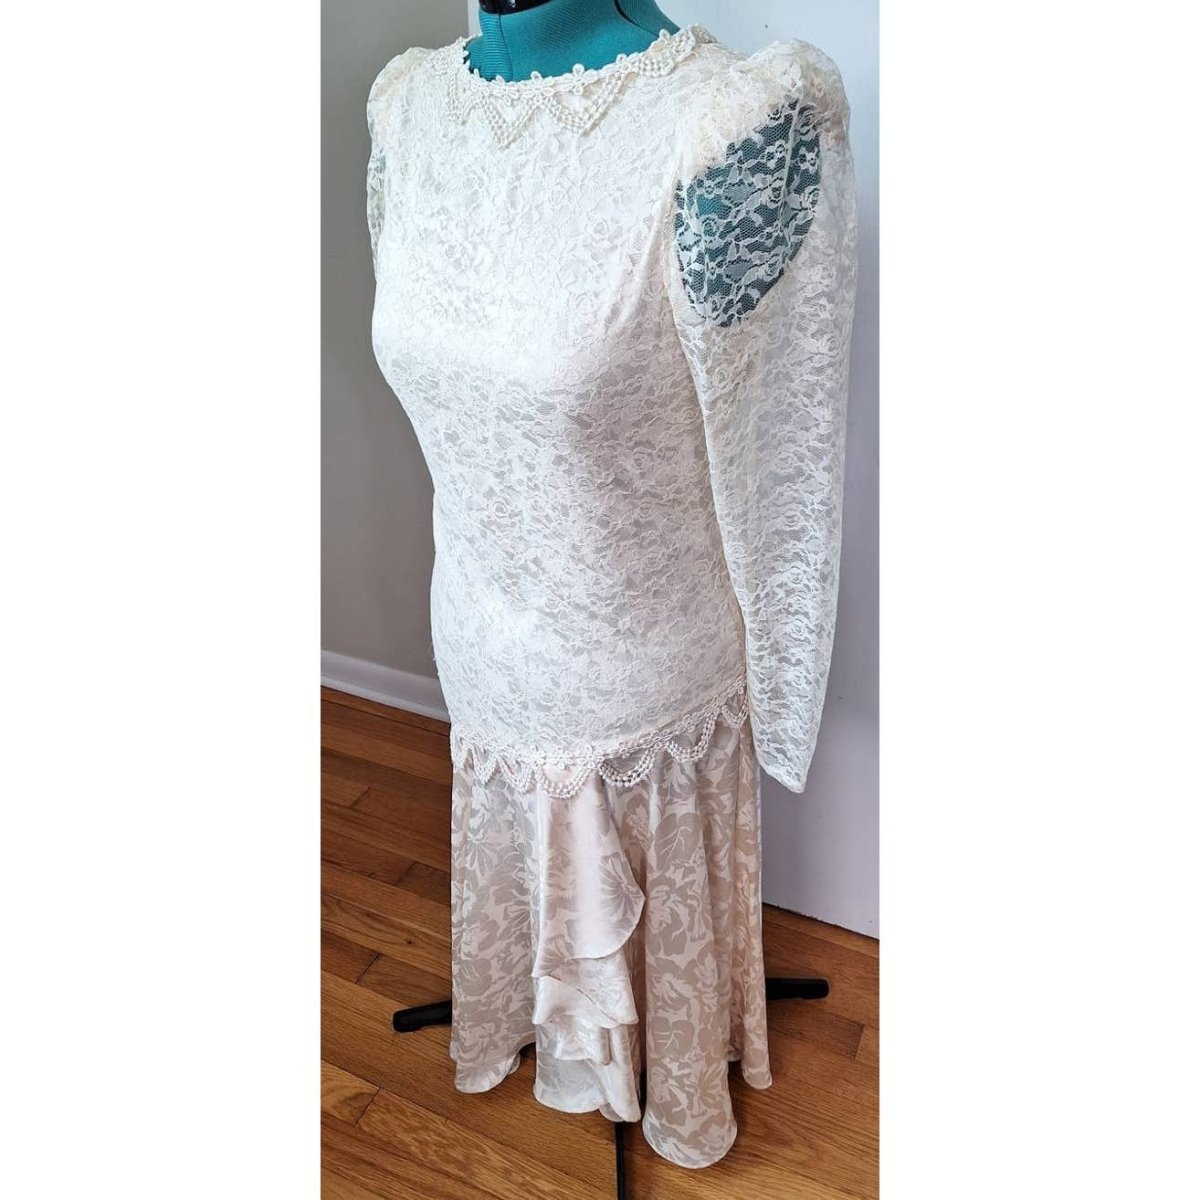 80s Lace Drop Waist Dress Size Medium to Large - themallvintage The Mall Vintage